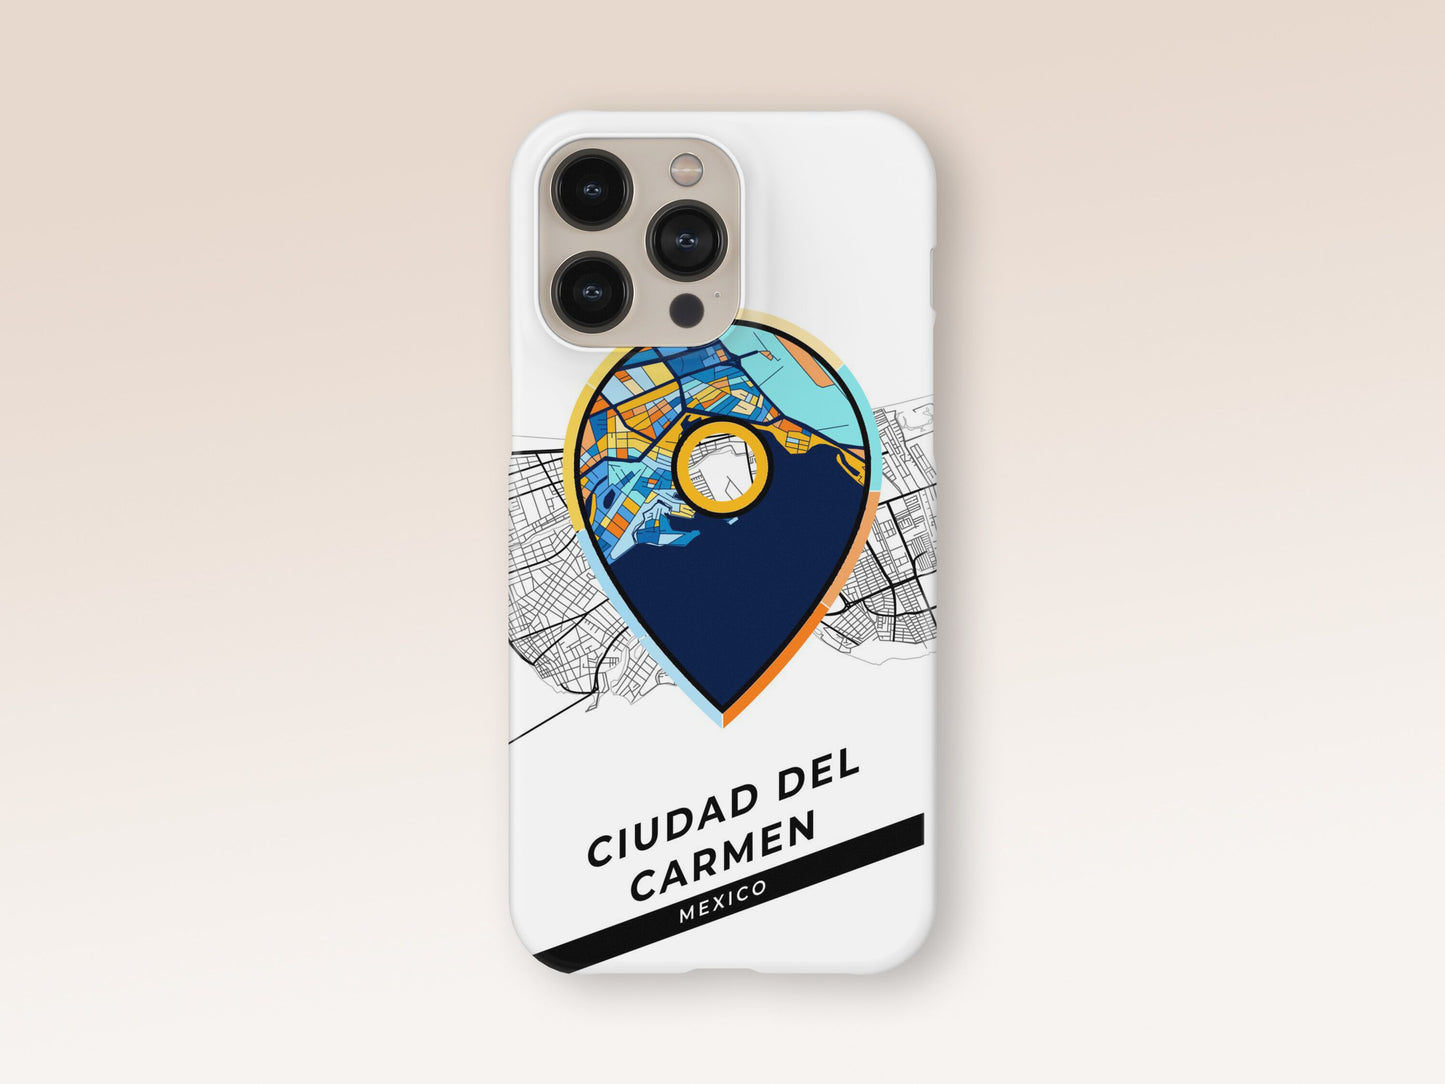 Ciudad Del Carmen Mexico slim phone case with colorful icon. Birthday, wedding or housewarming gift. Couple match cases. 1